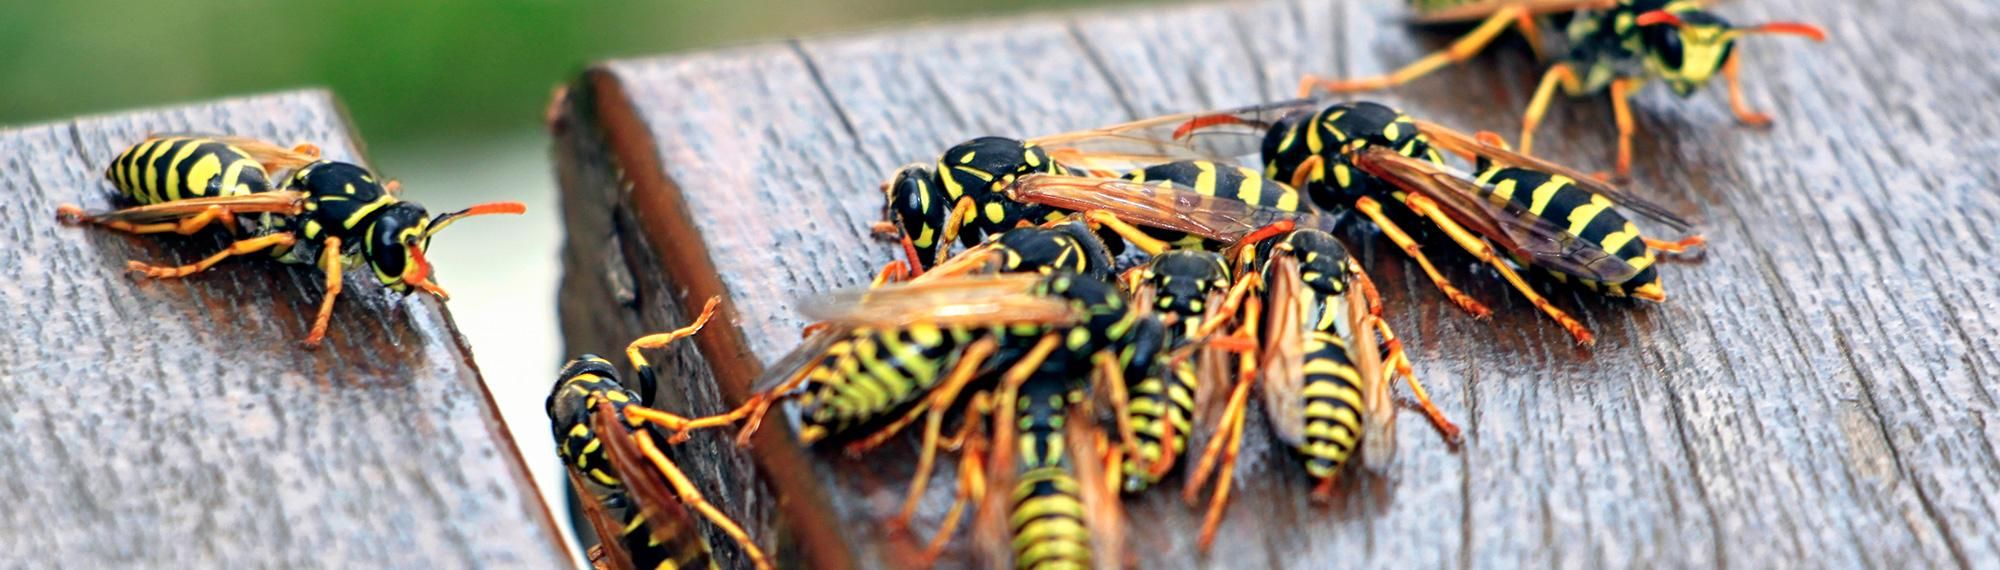 yellow jackets on a picnic table